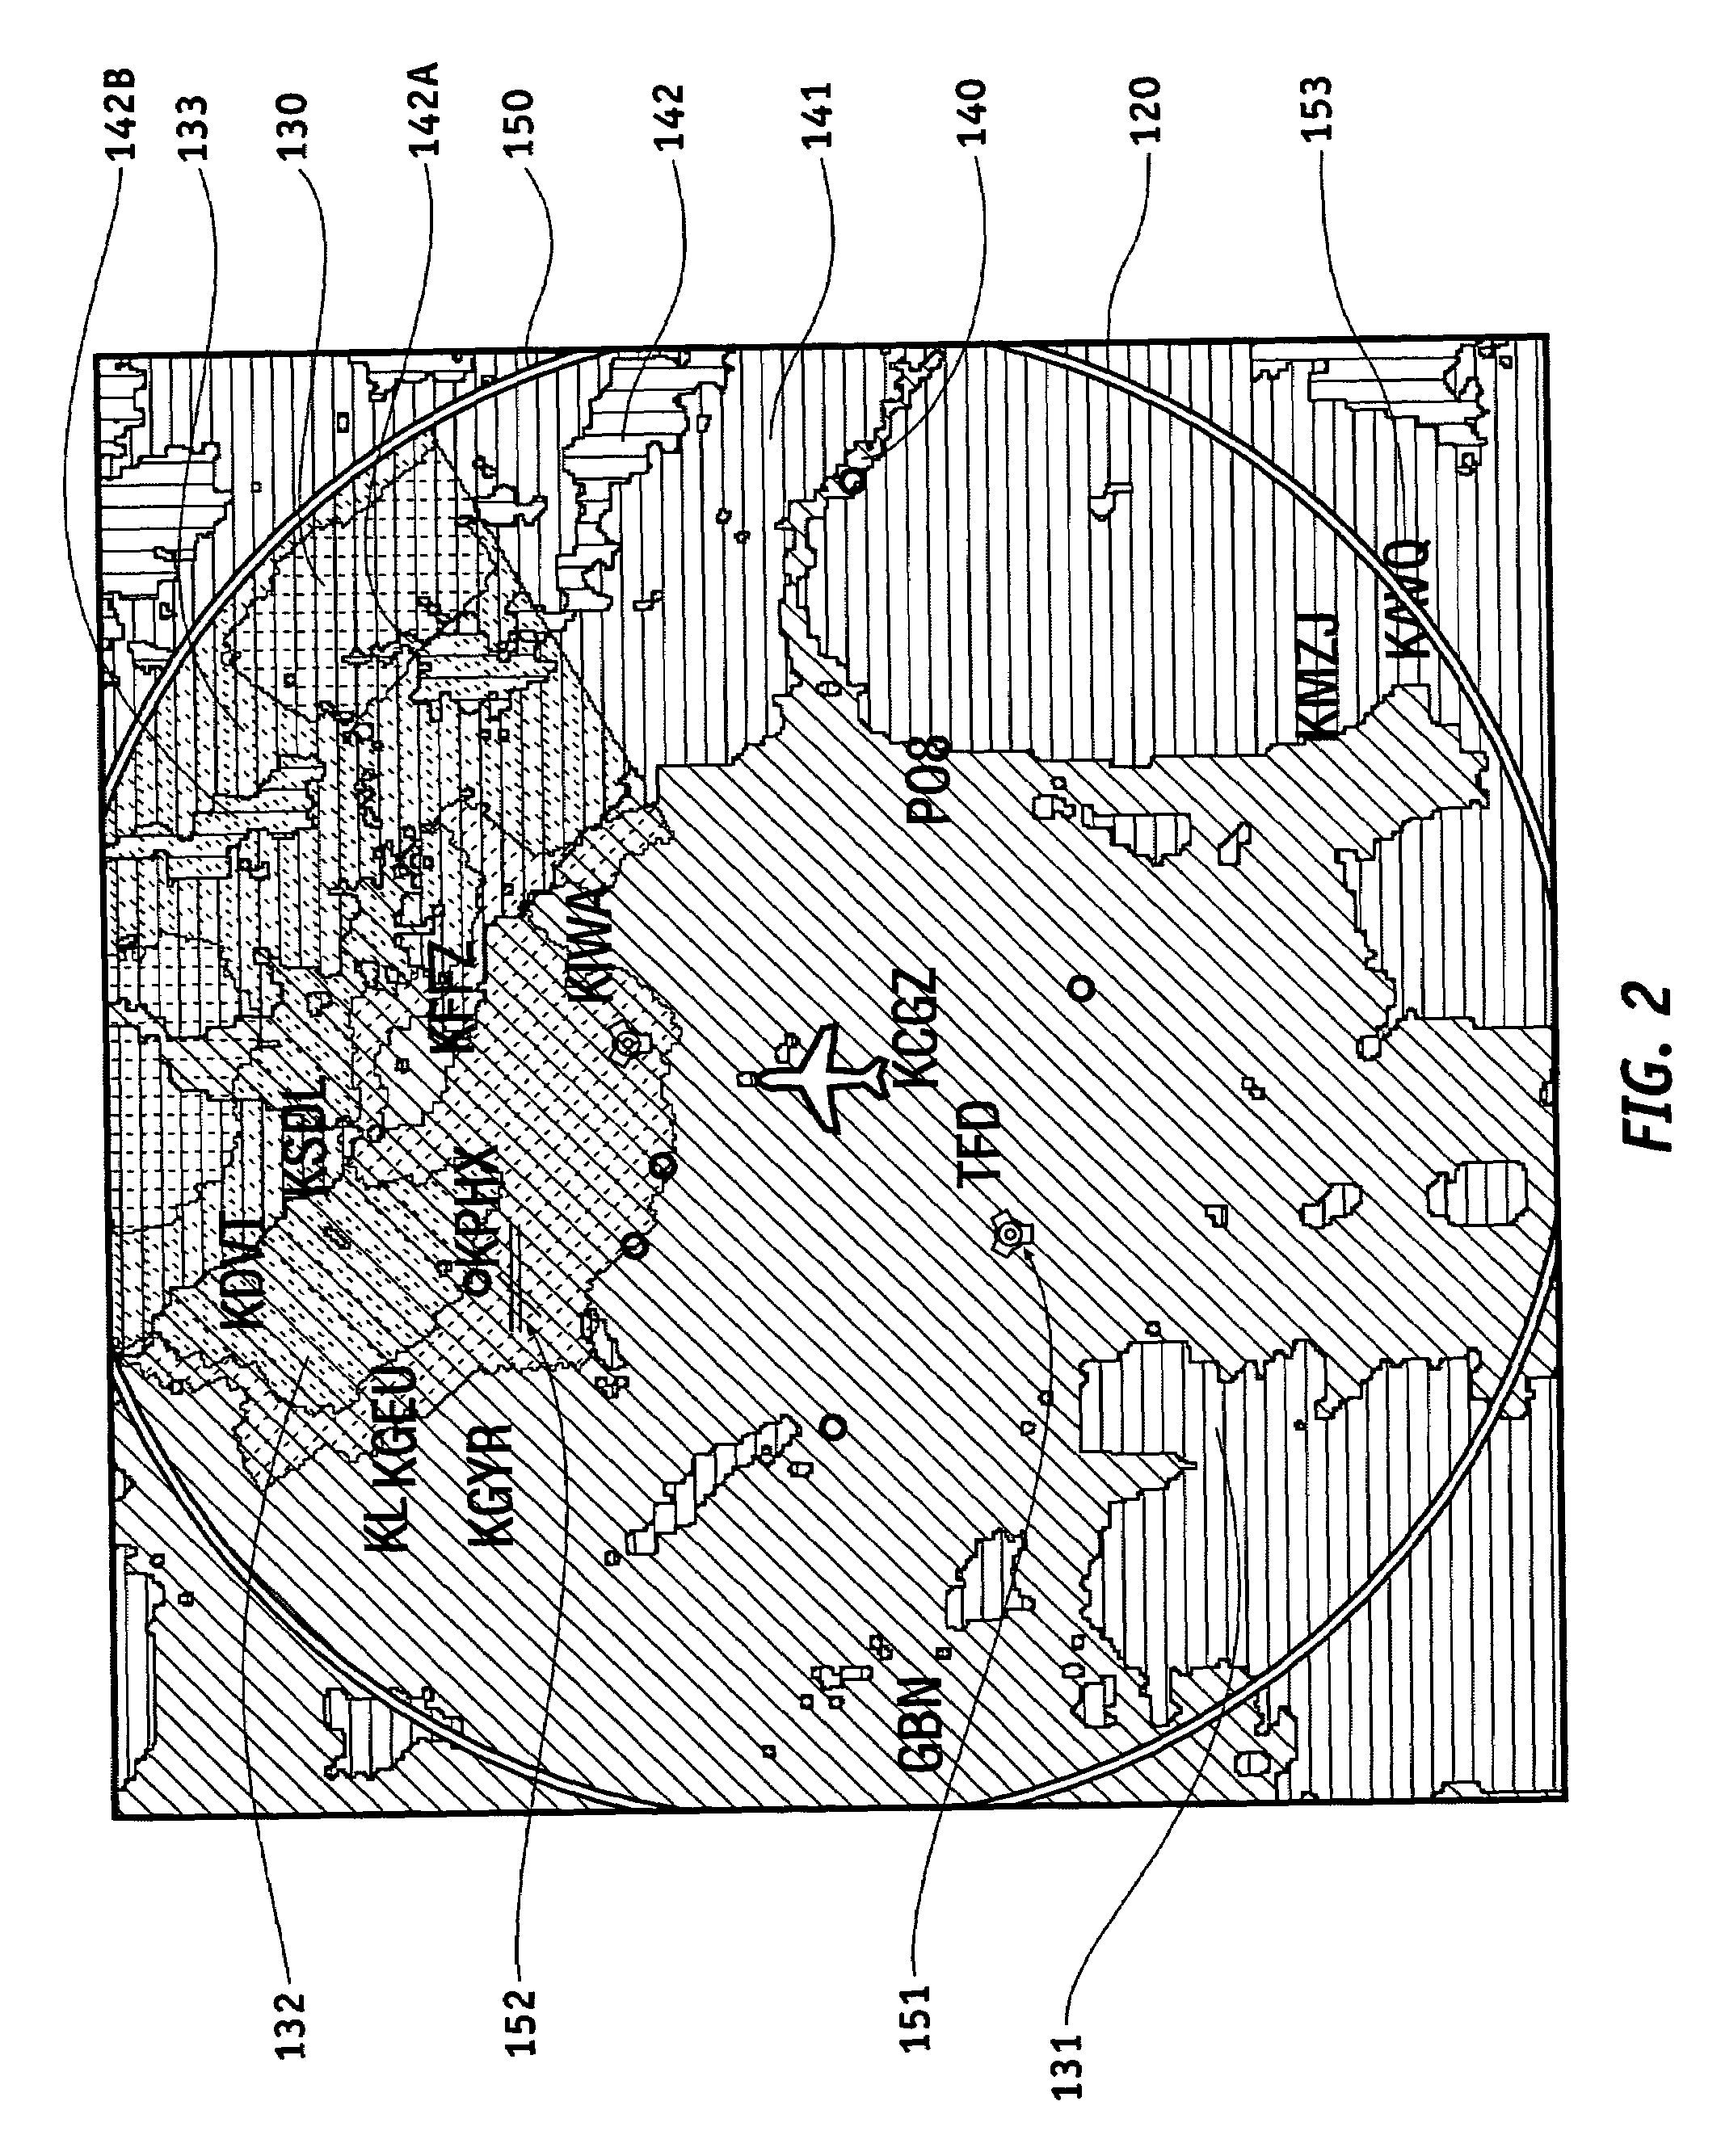 Methods and apparatus for displaying multiple data categories